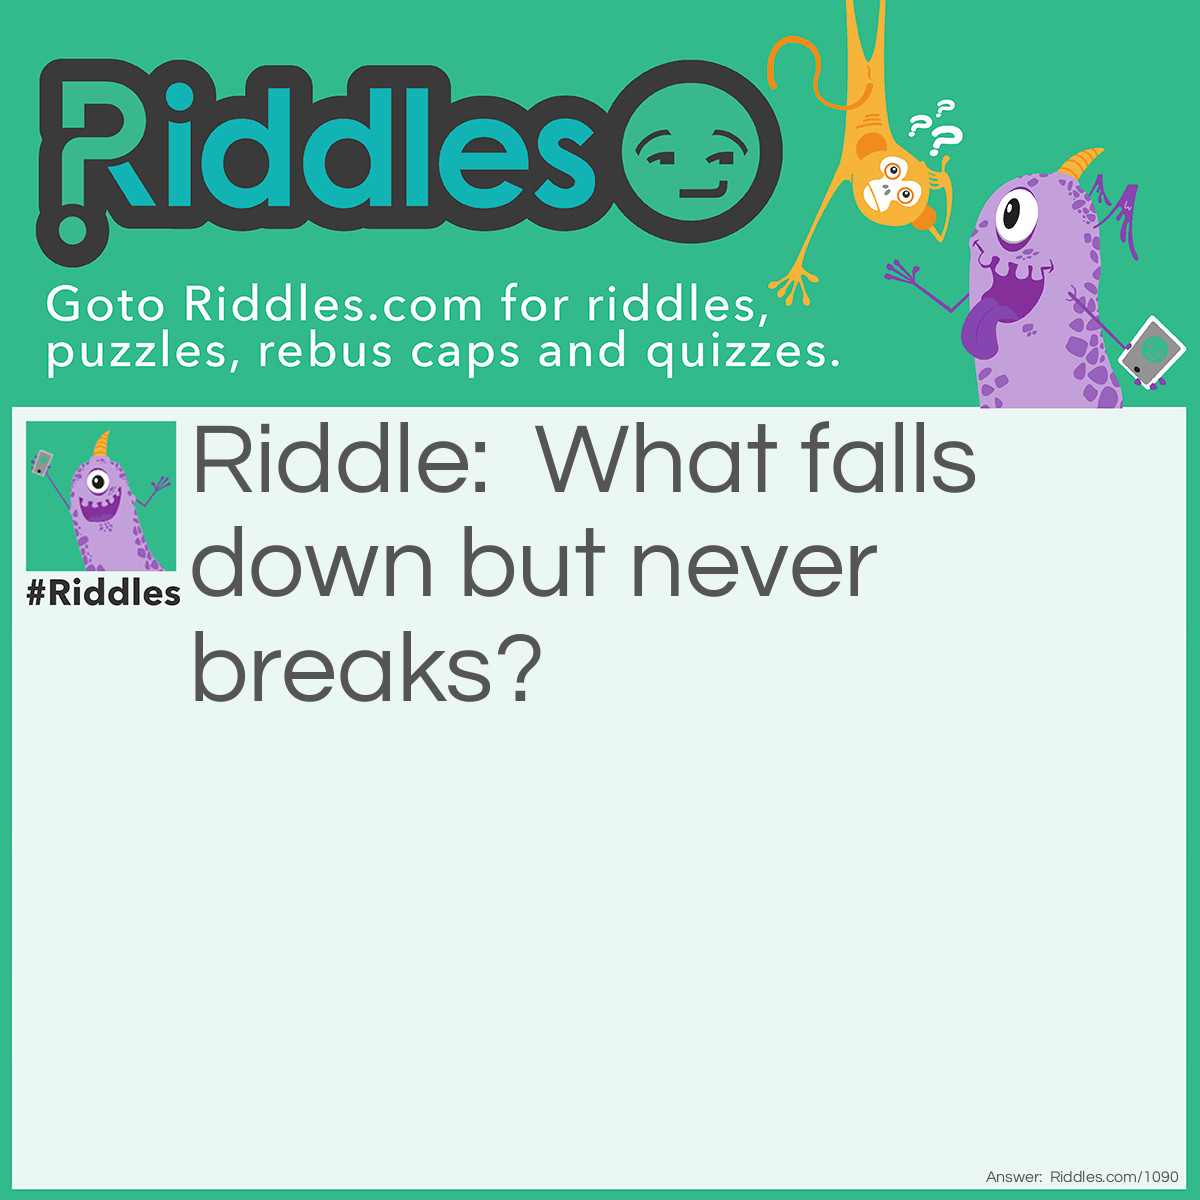 Riddle: What falls down but never breaks? Answer: Nightfall.